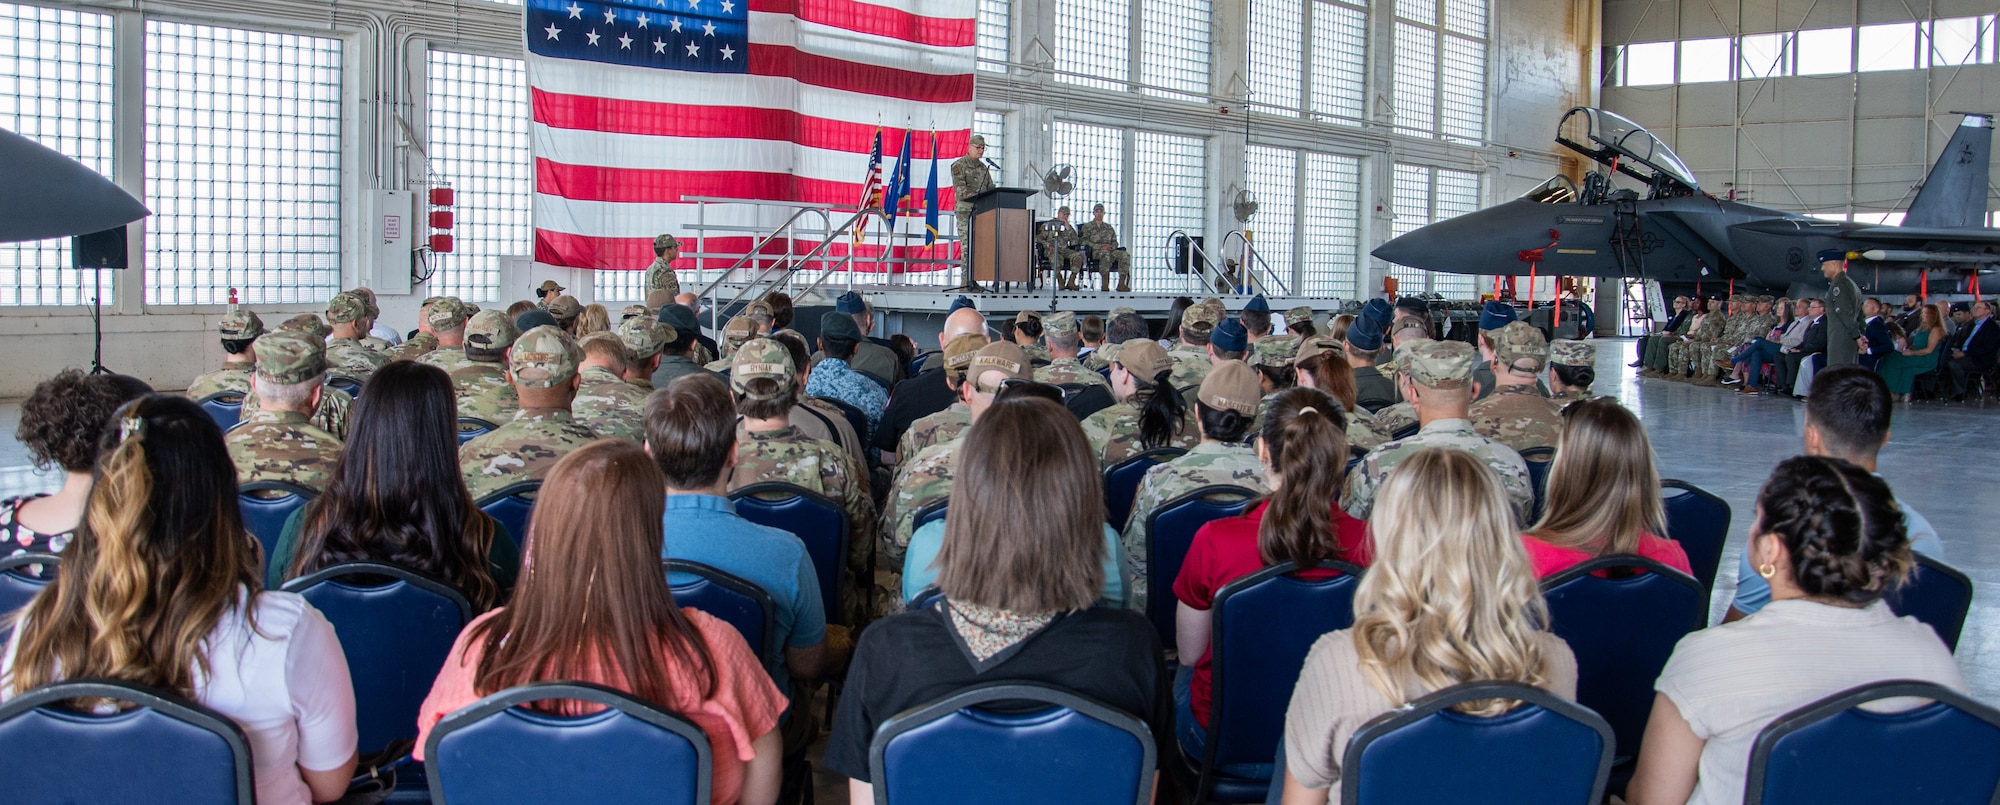 A crowd of people in a hangar listen to Maj. Gen. Michael Koscheski speech give a speech during the 366th Fighter Wing change of command ceremony, with an F-15E Strike Eagle in the background.